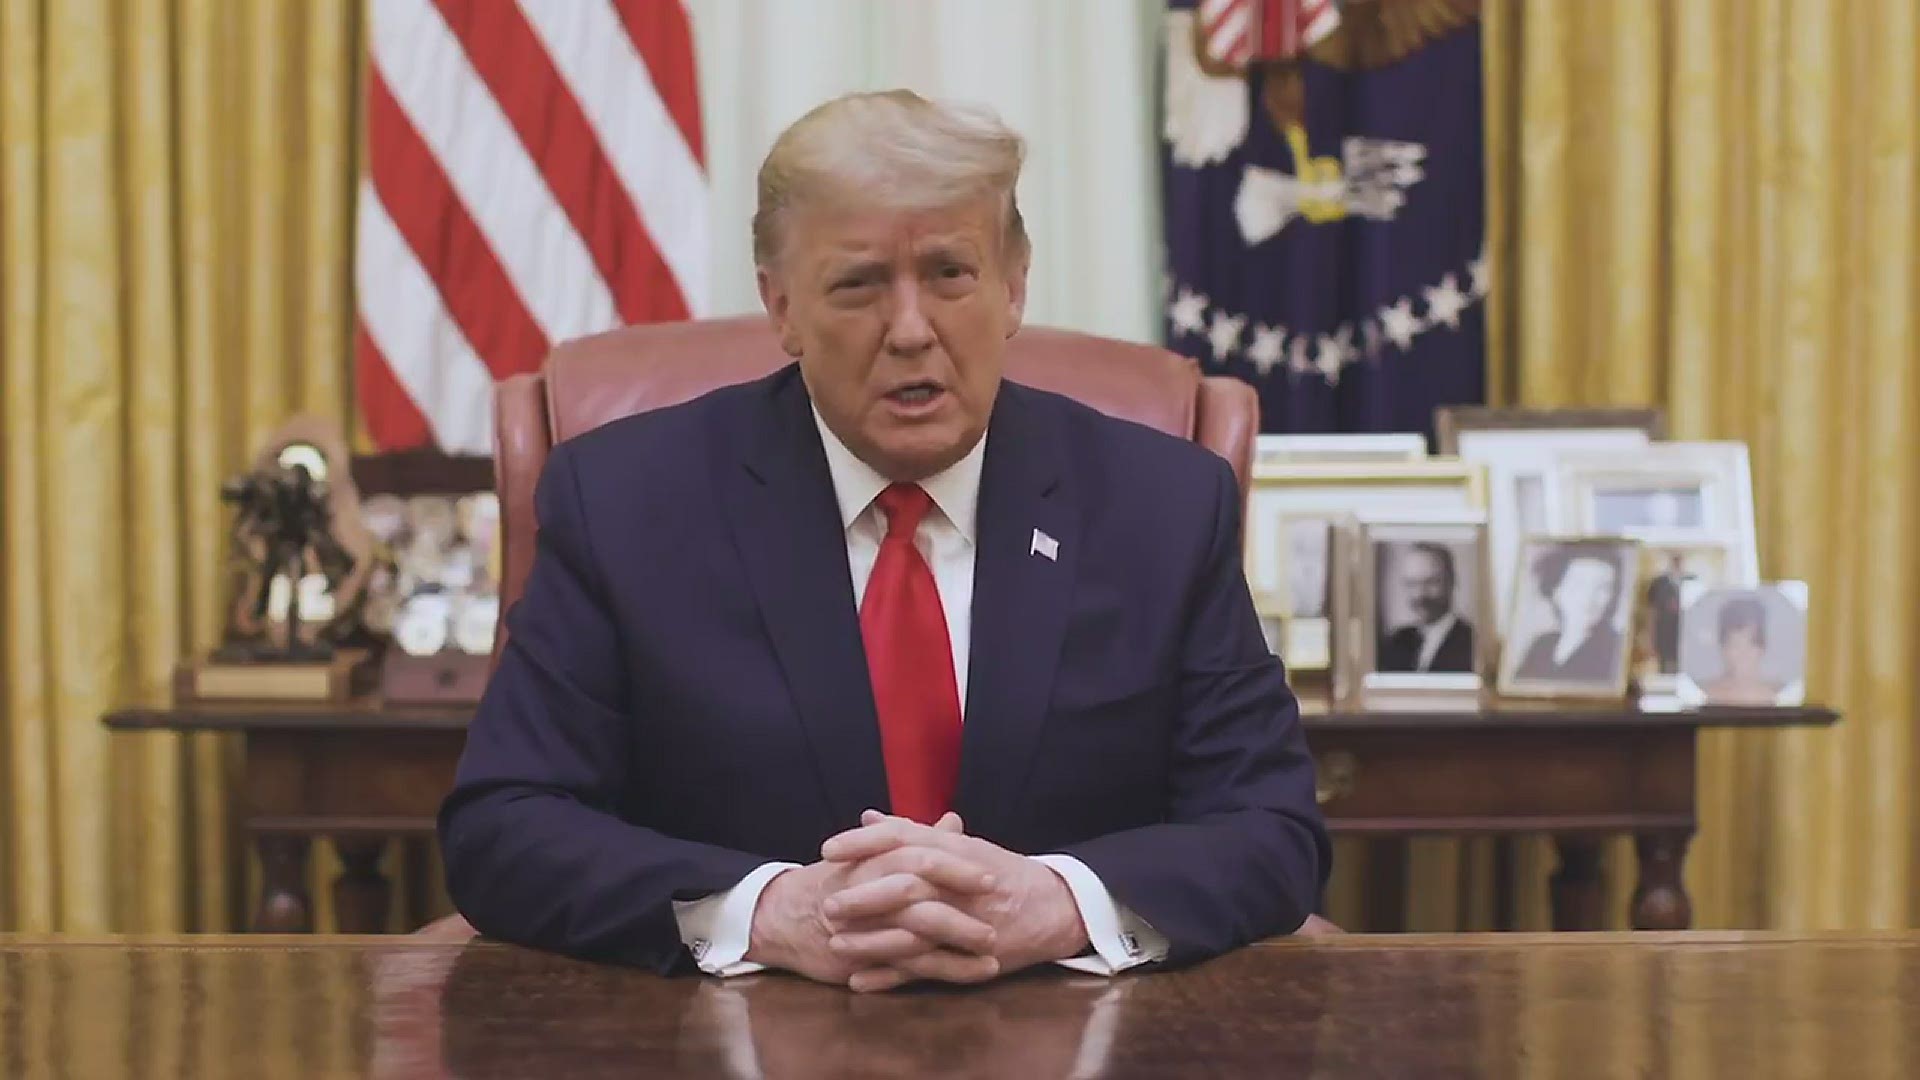 The President released the video through the White House Twitter account after the House voted to impeach him.